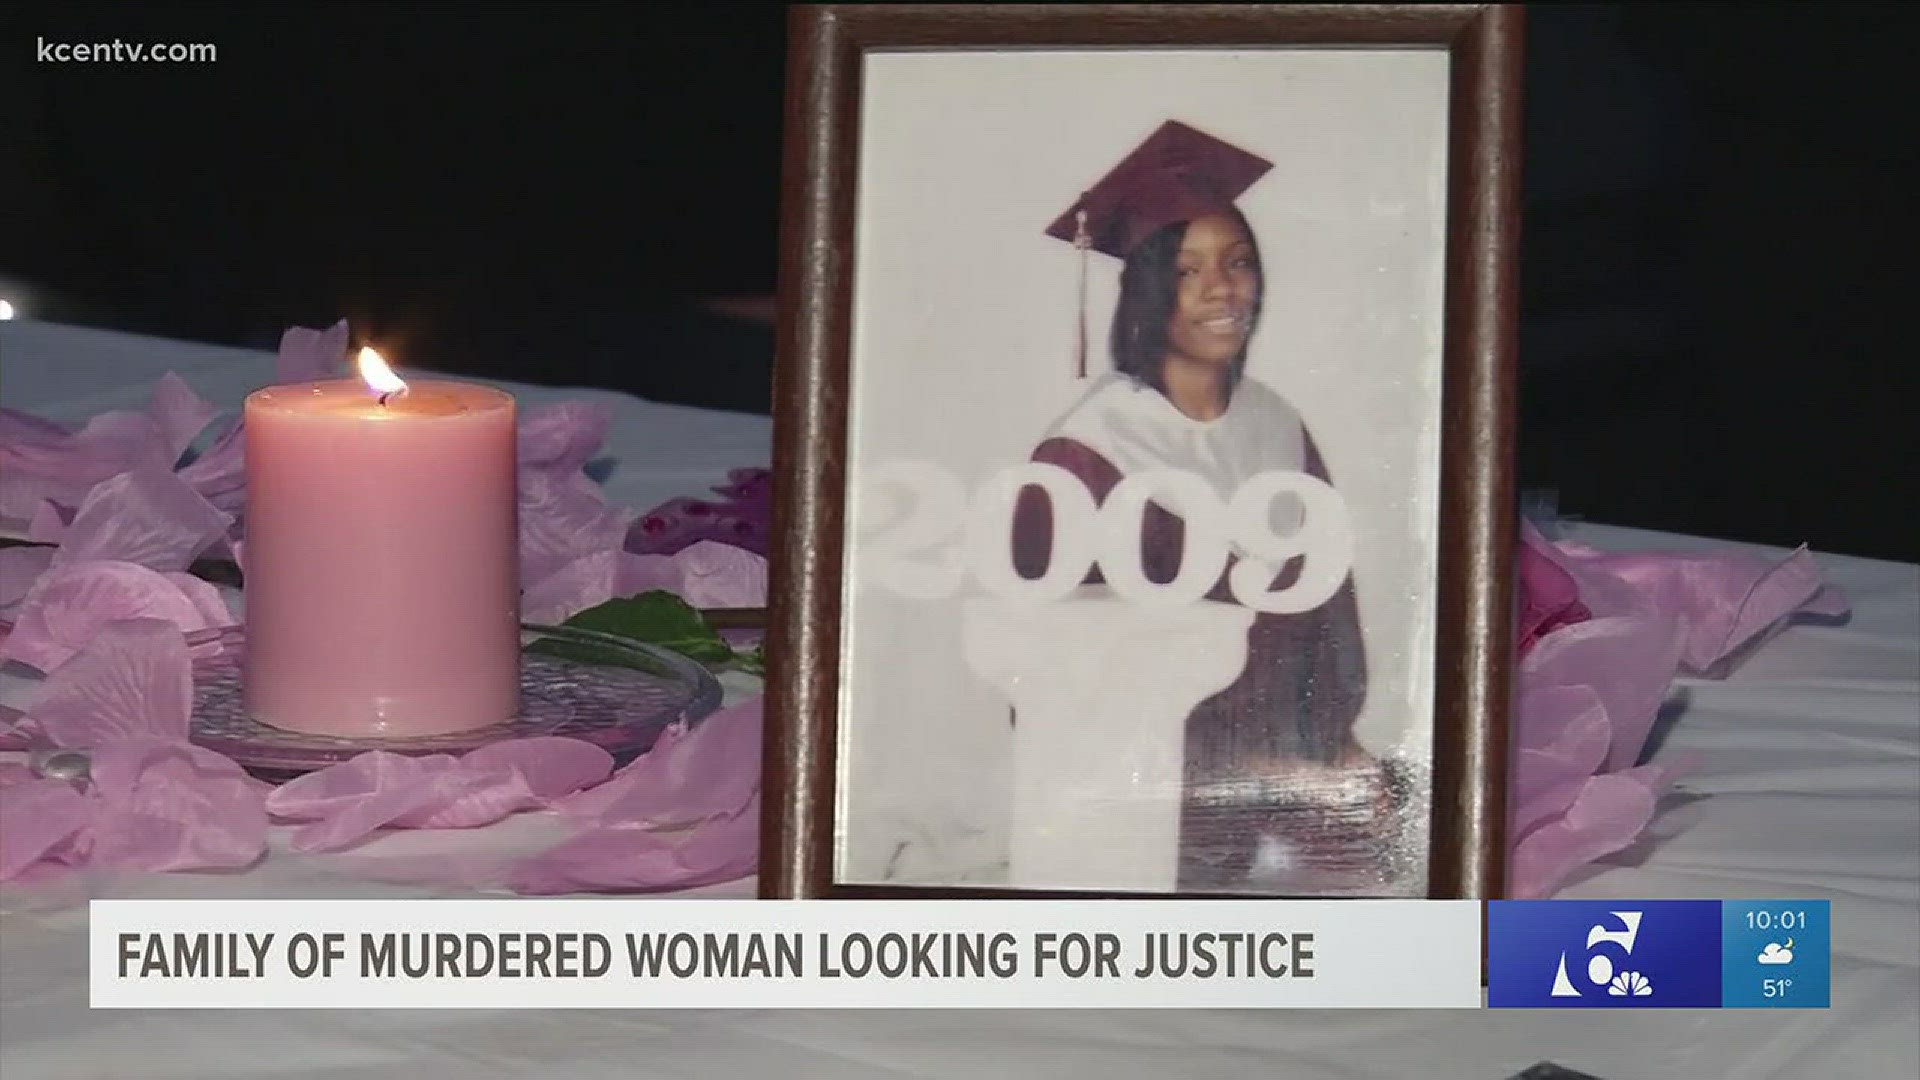 Family of murdered woman looking for justice